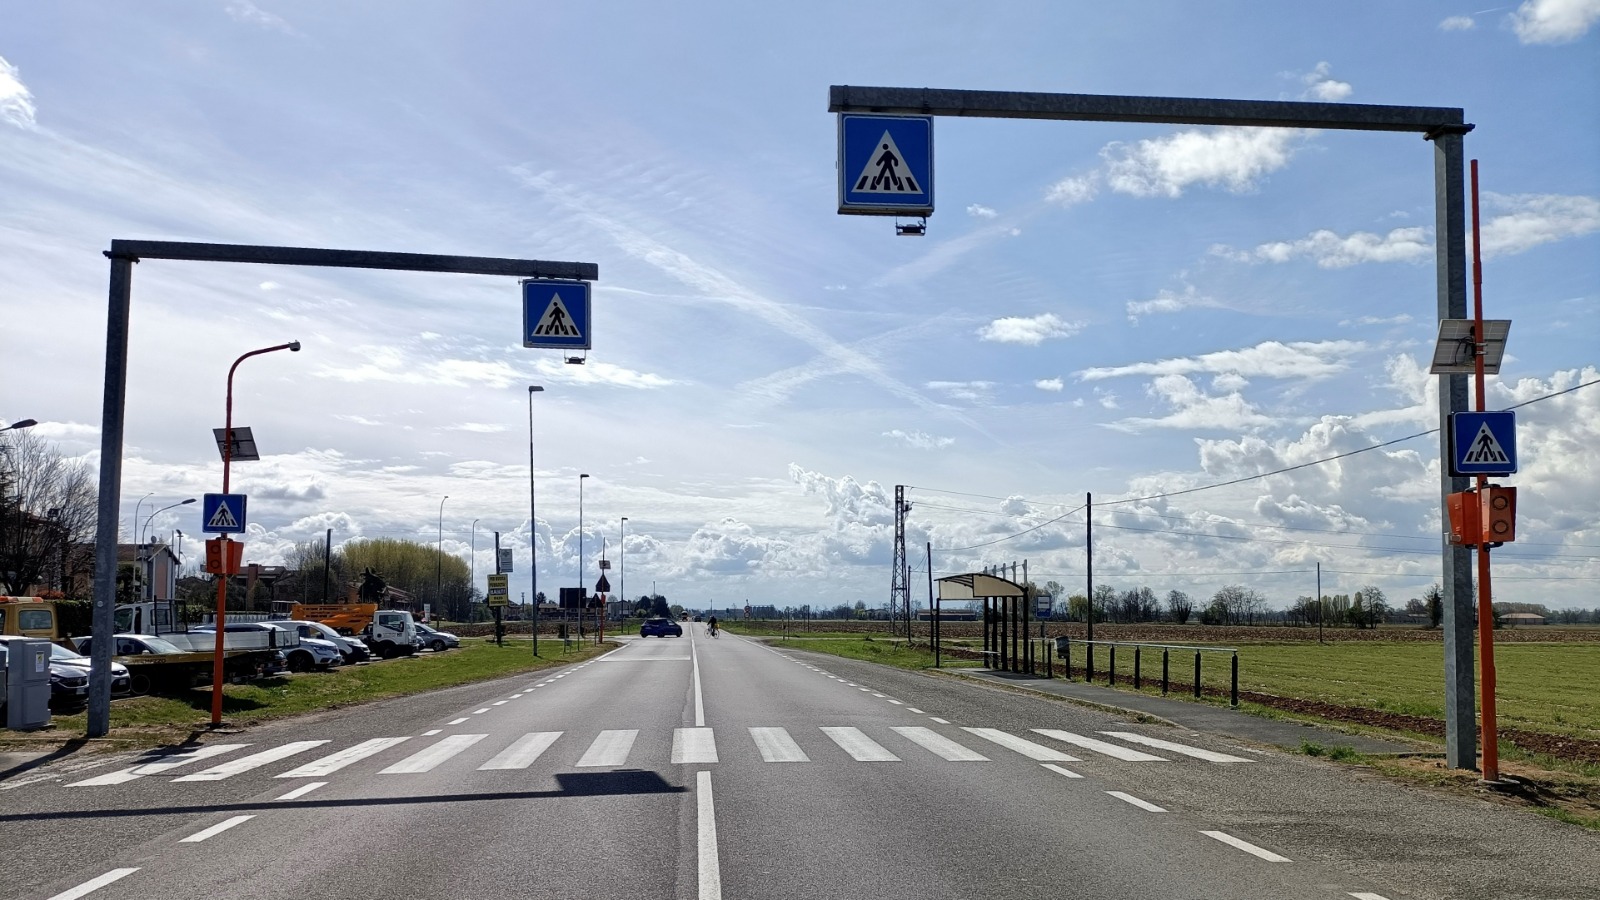 Metropolitan city of Milan: new installations for the control of traffic light and pedestrian crossings and roads along the s.p. of the authority